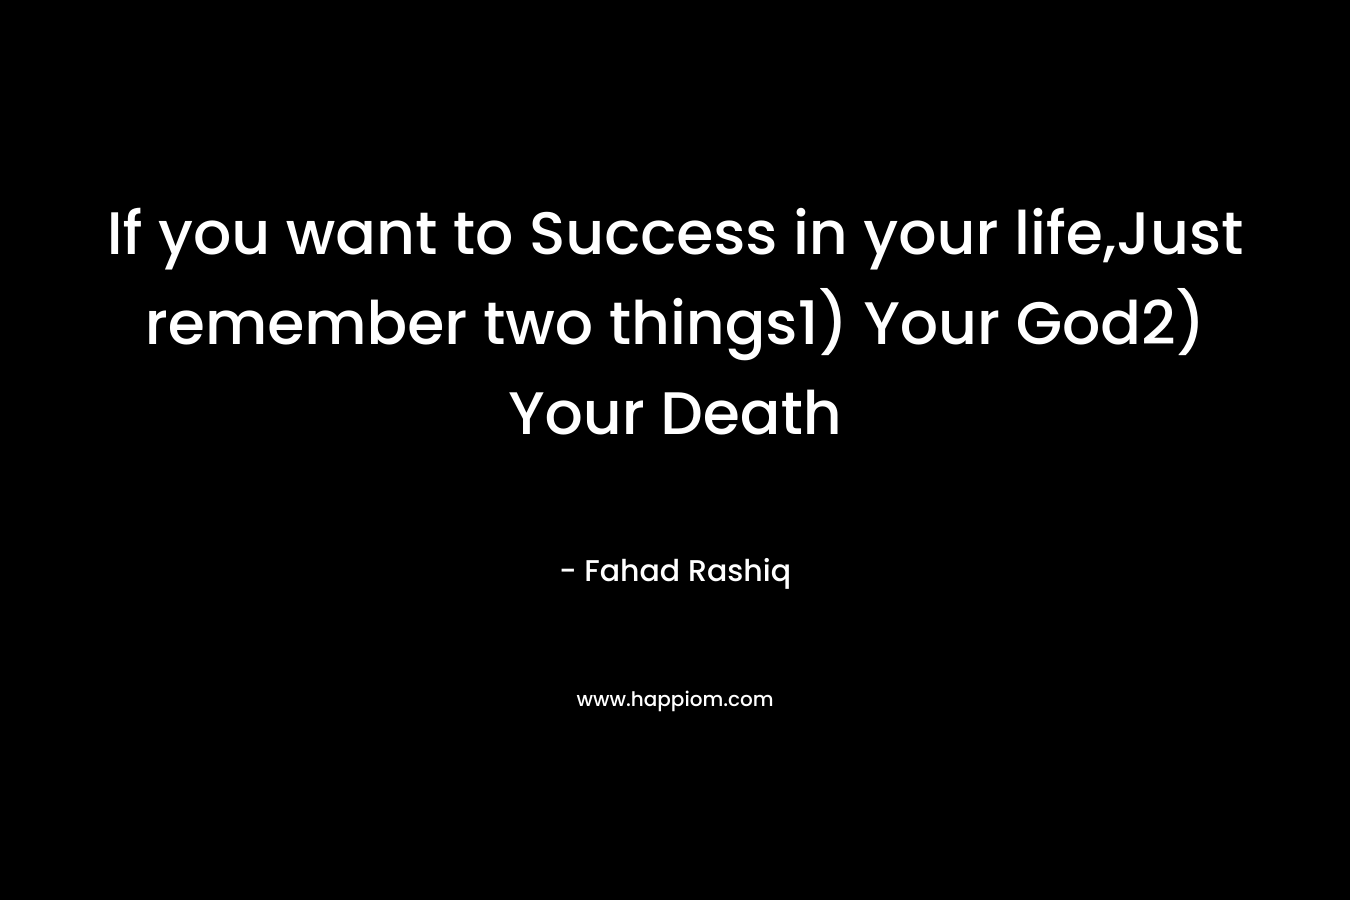 If you want to Success in your life,Just remember two things1) Your God2) Your Death